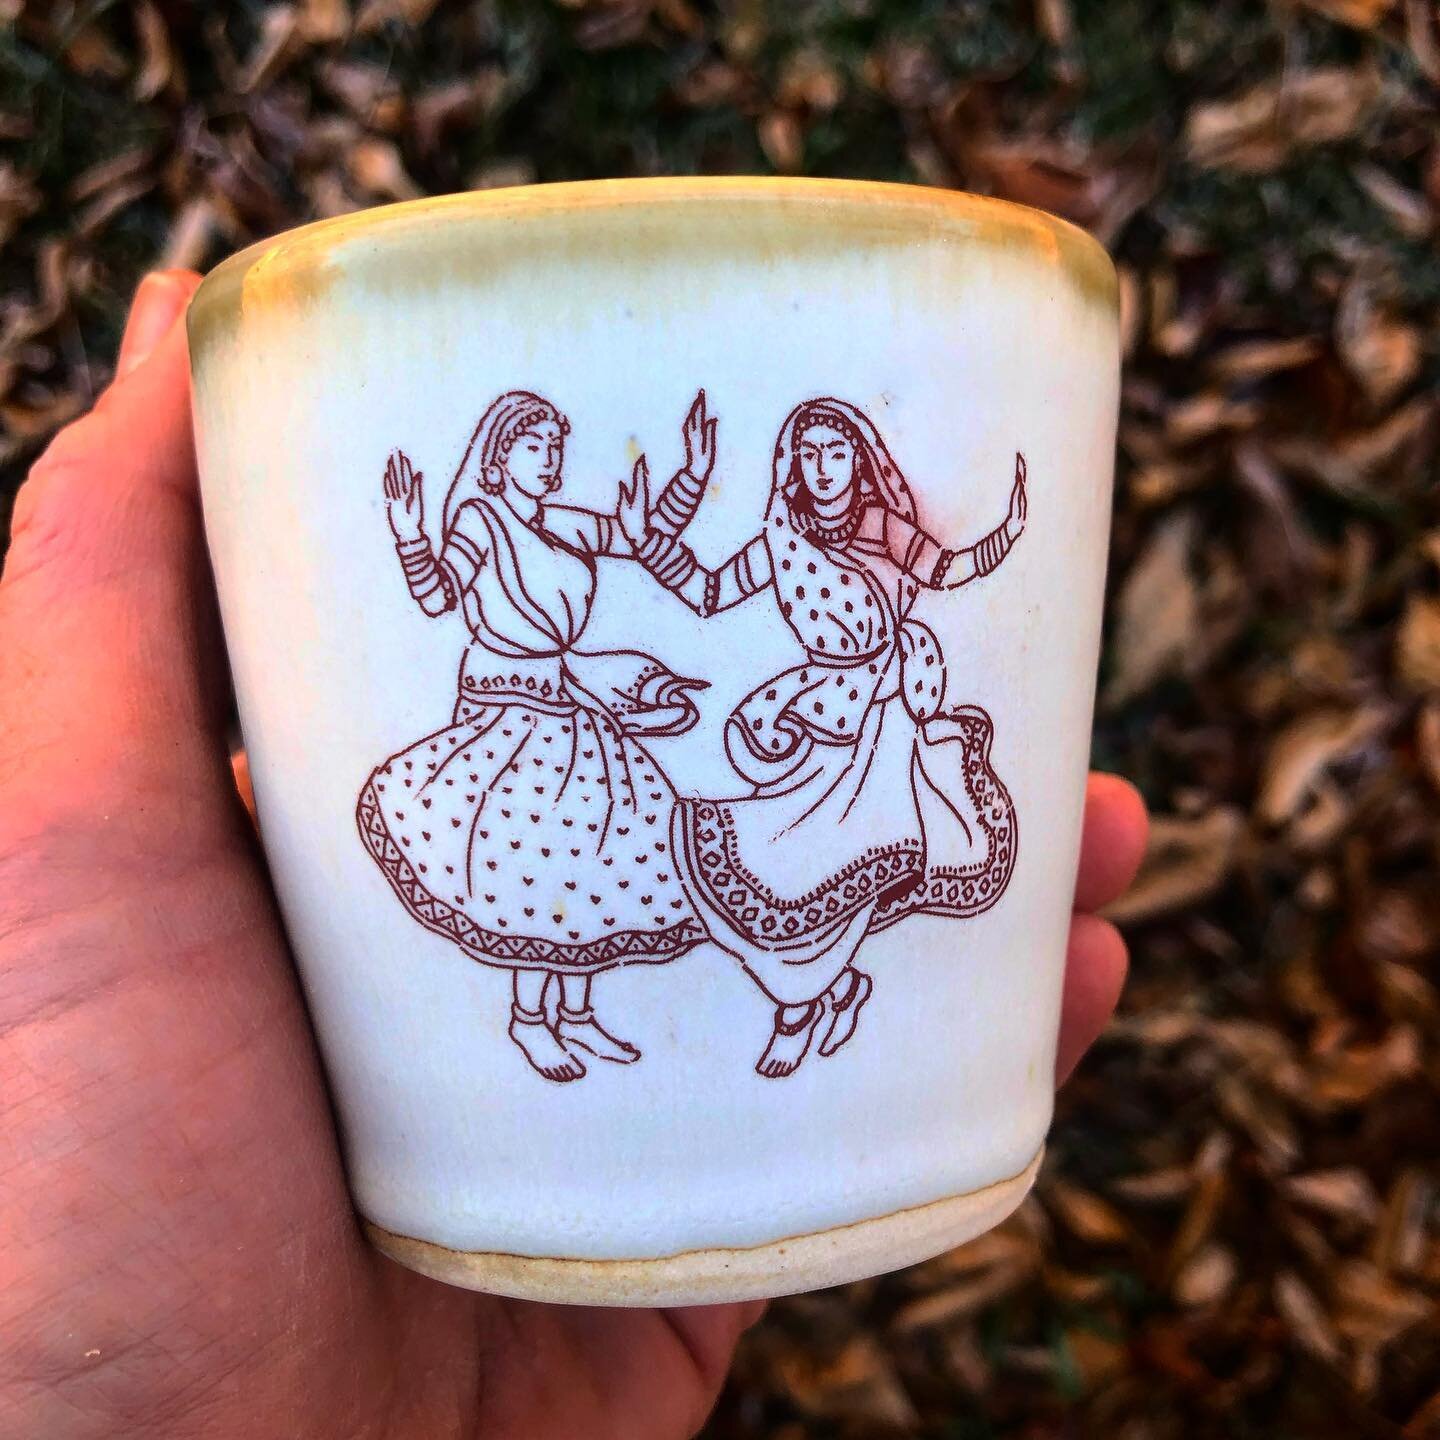 Good morning! Just unloaded some toasty cups and mugs from their decal firing and I&rsquo;m feeling about like these ladies 🥳 Lots left to do today with setting up for the @marshallhandmademarket this weekend but it&rsquo;s the home stretch!

I&rsqu